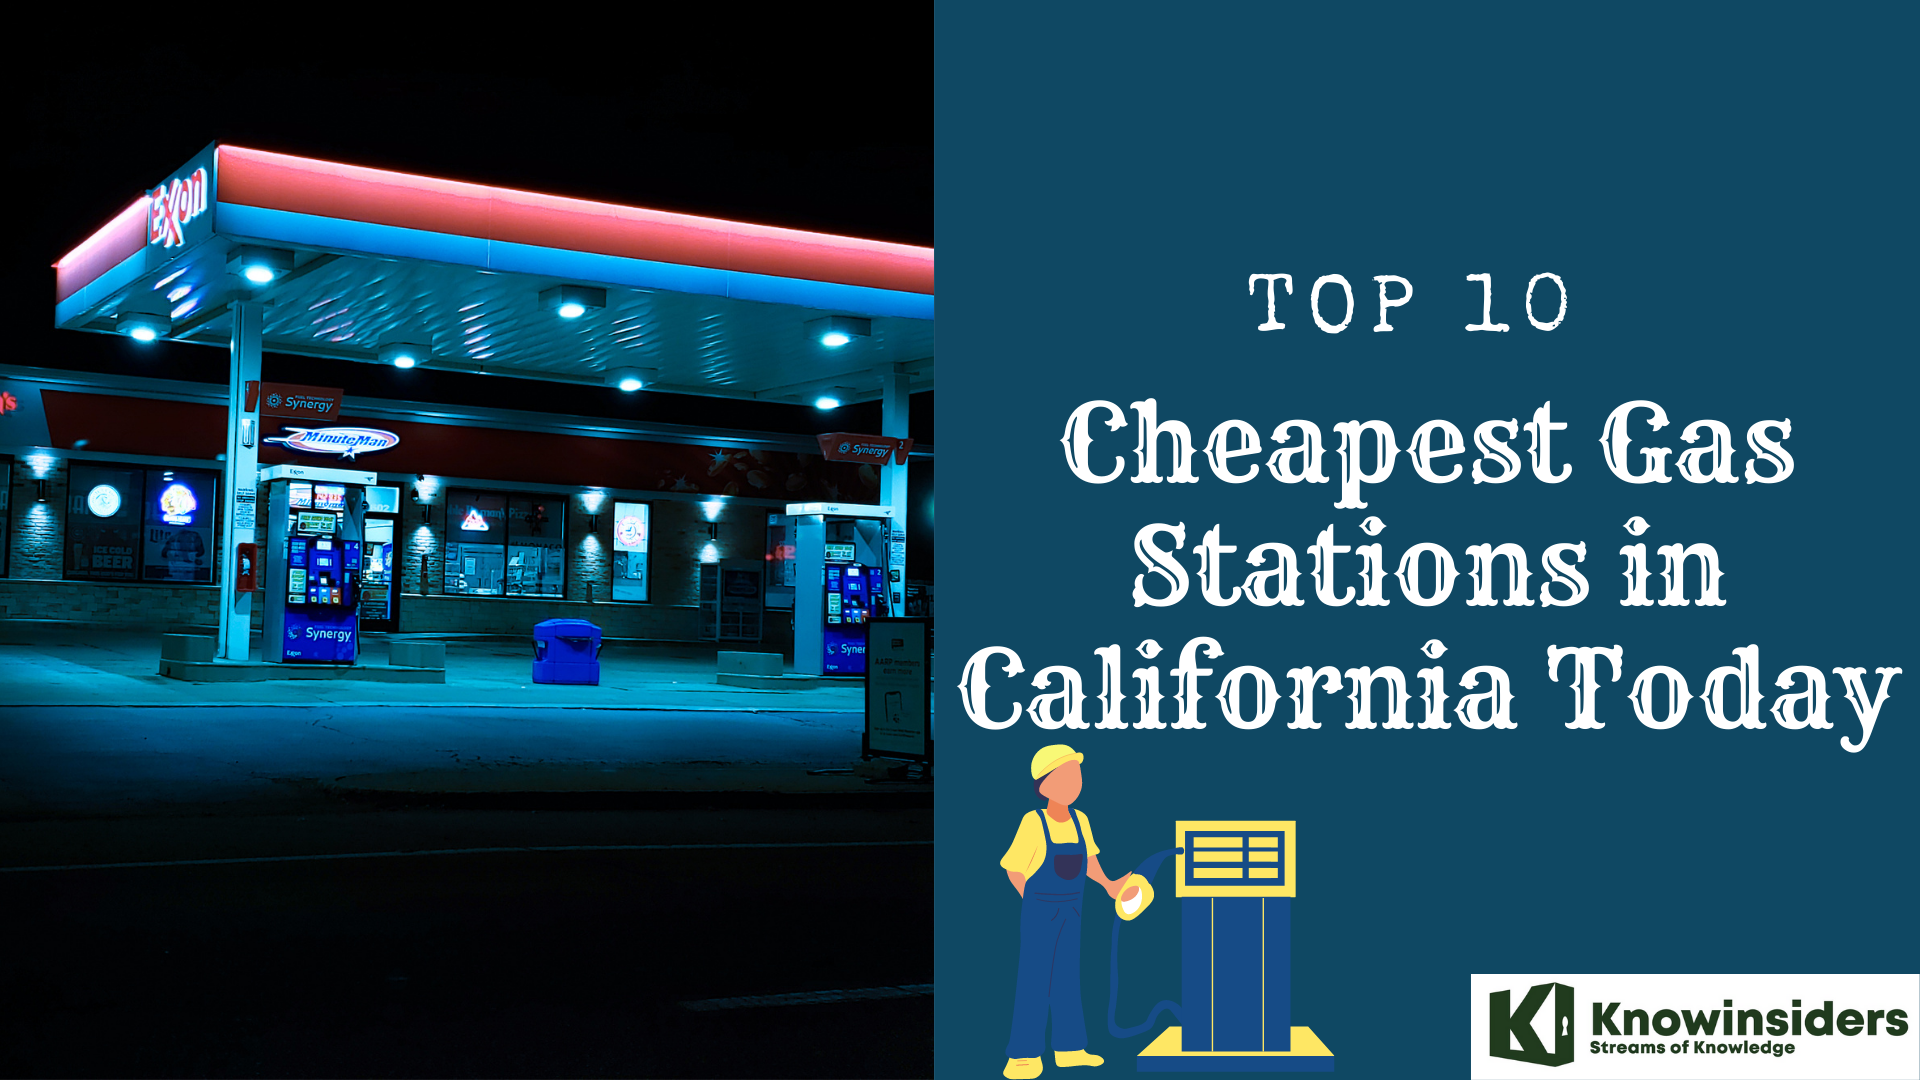 Top 10 Cheapest Gas Stations in California Today